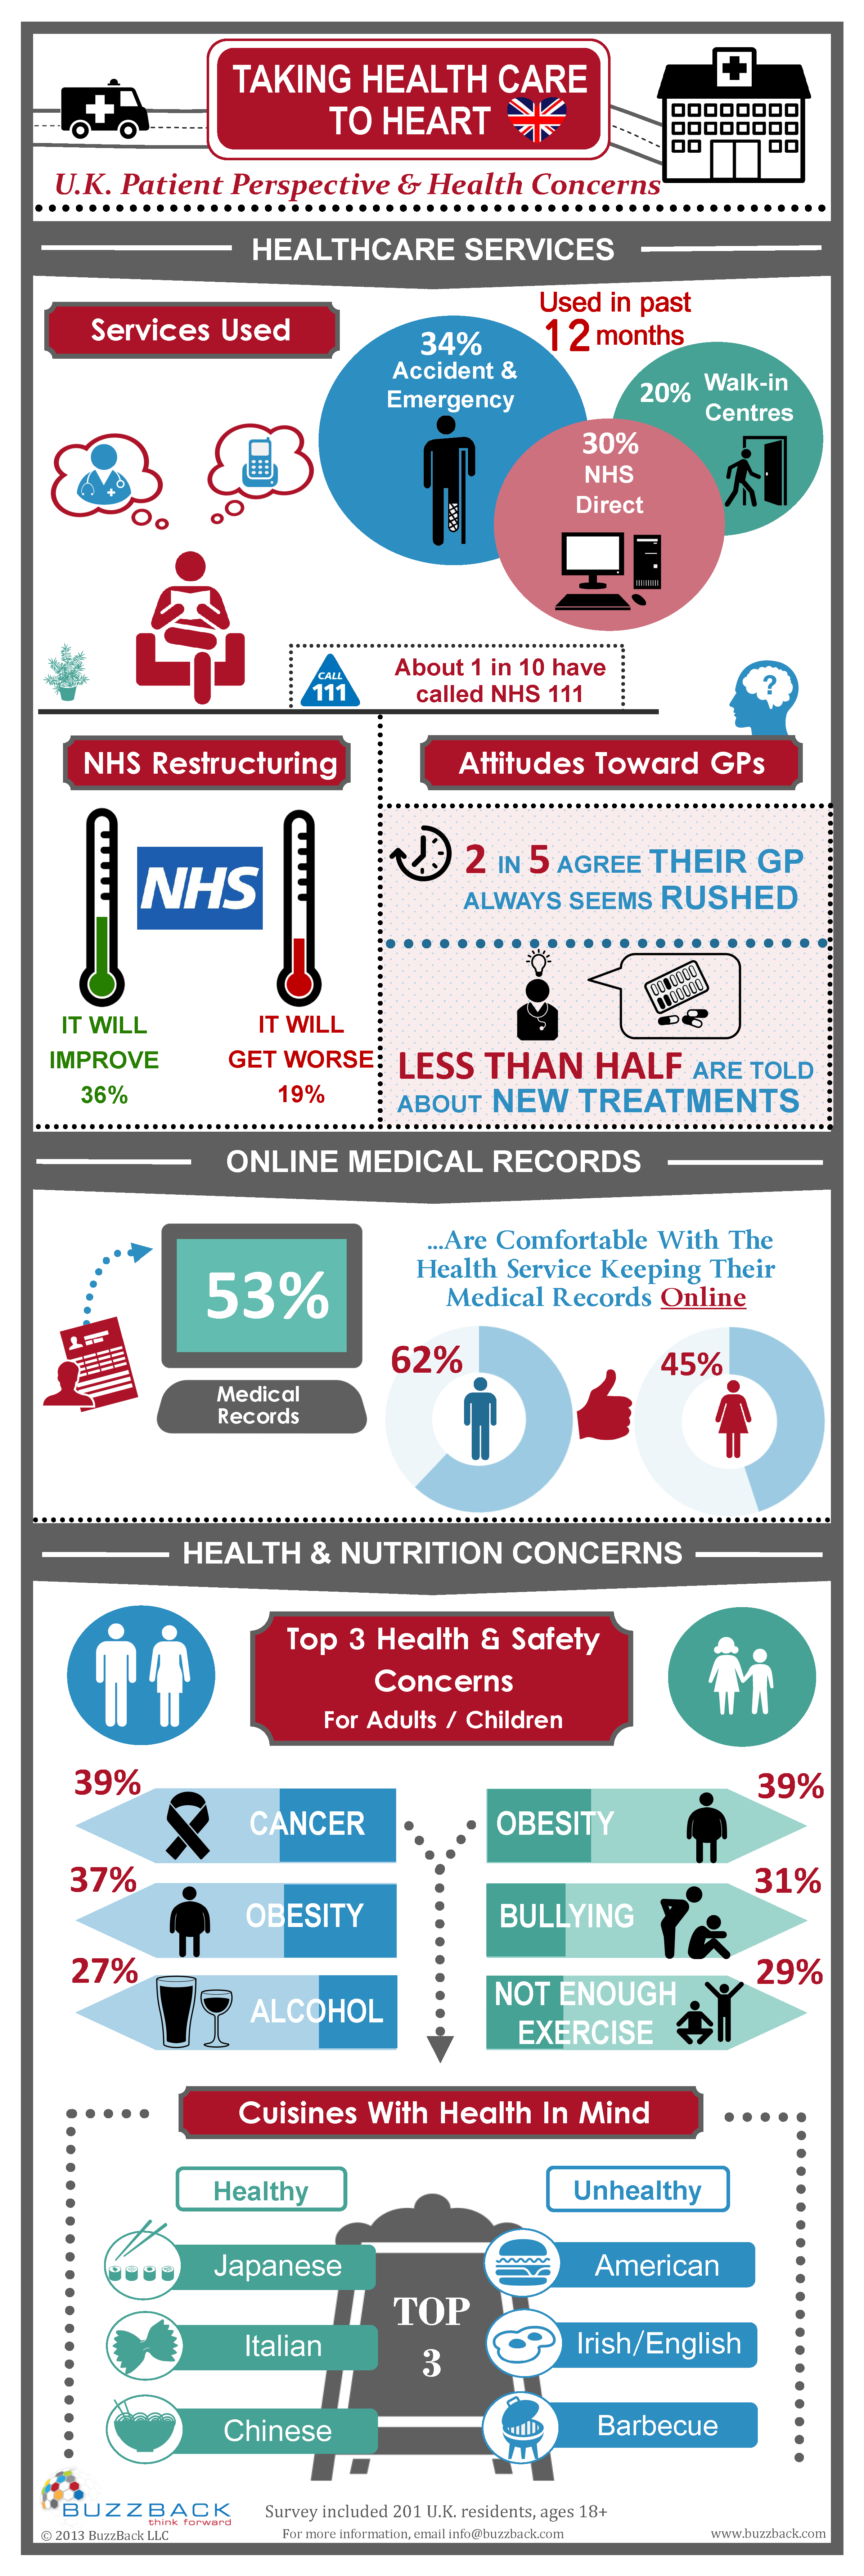 2013.10-UK-Patient-and-Healthcare